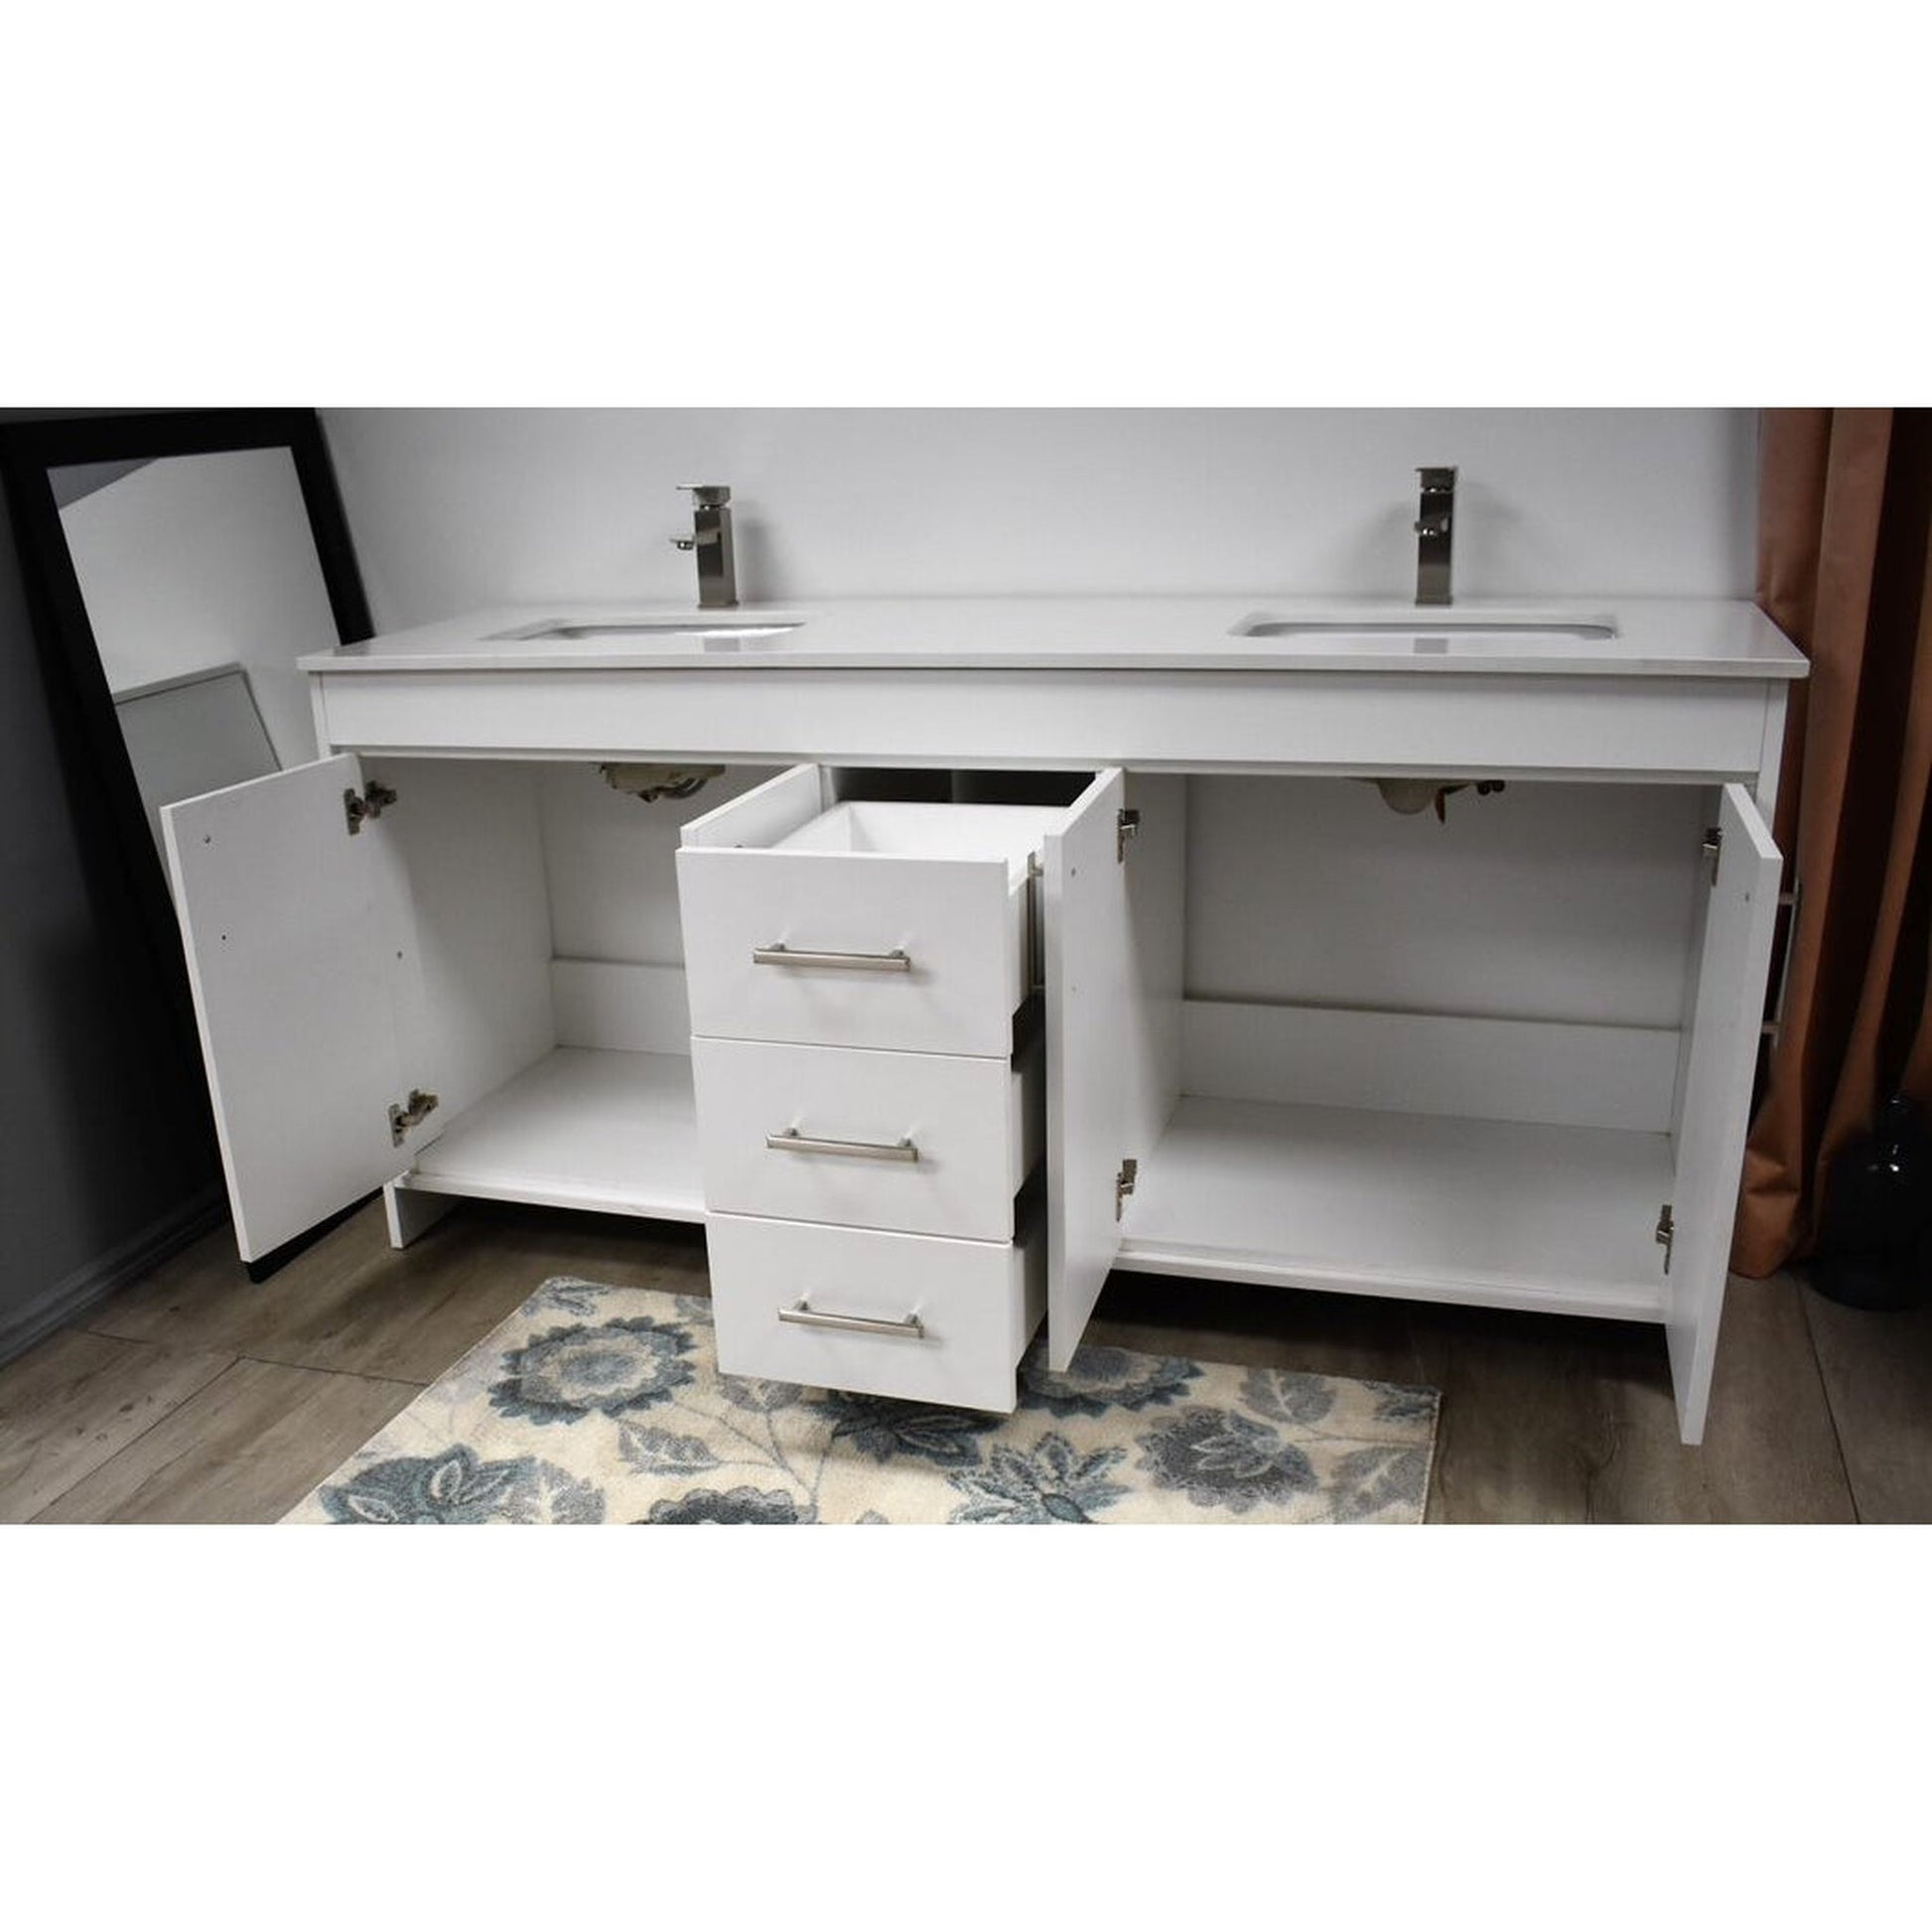 Volpa USA Capri 60" x 22" White Freestanding Modern Bathroom Vanity With Undermount Double Sink And White Microstone Top With Brushed Nickel Edge Handles